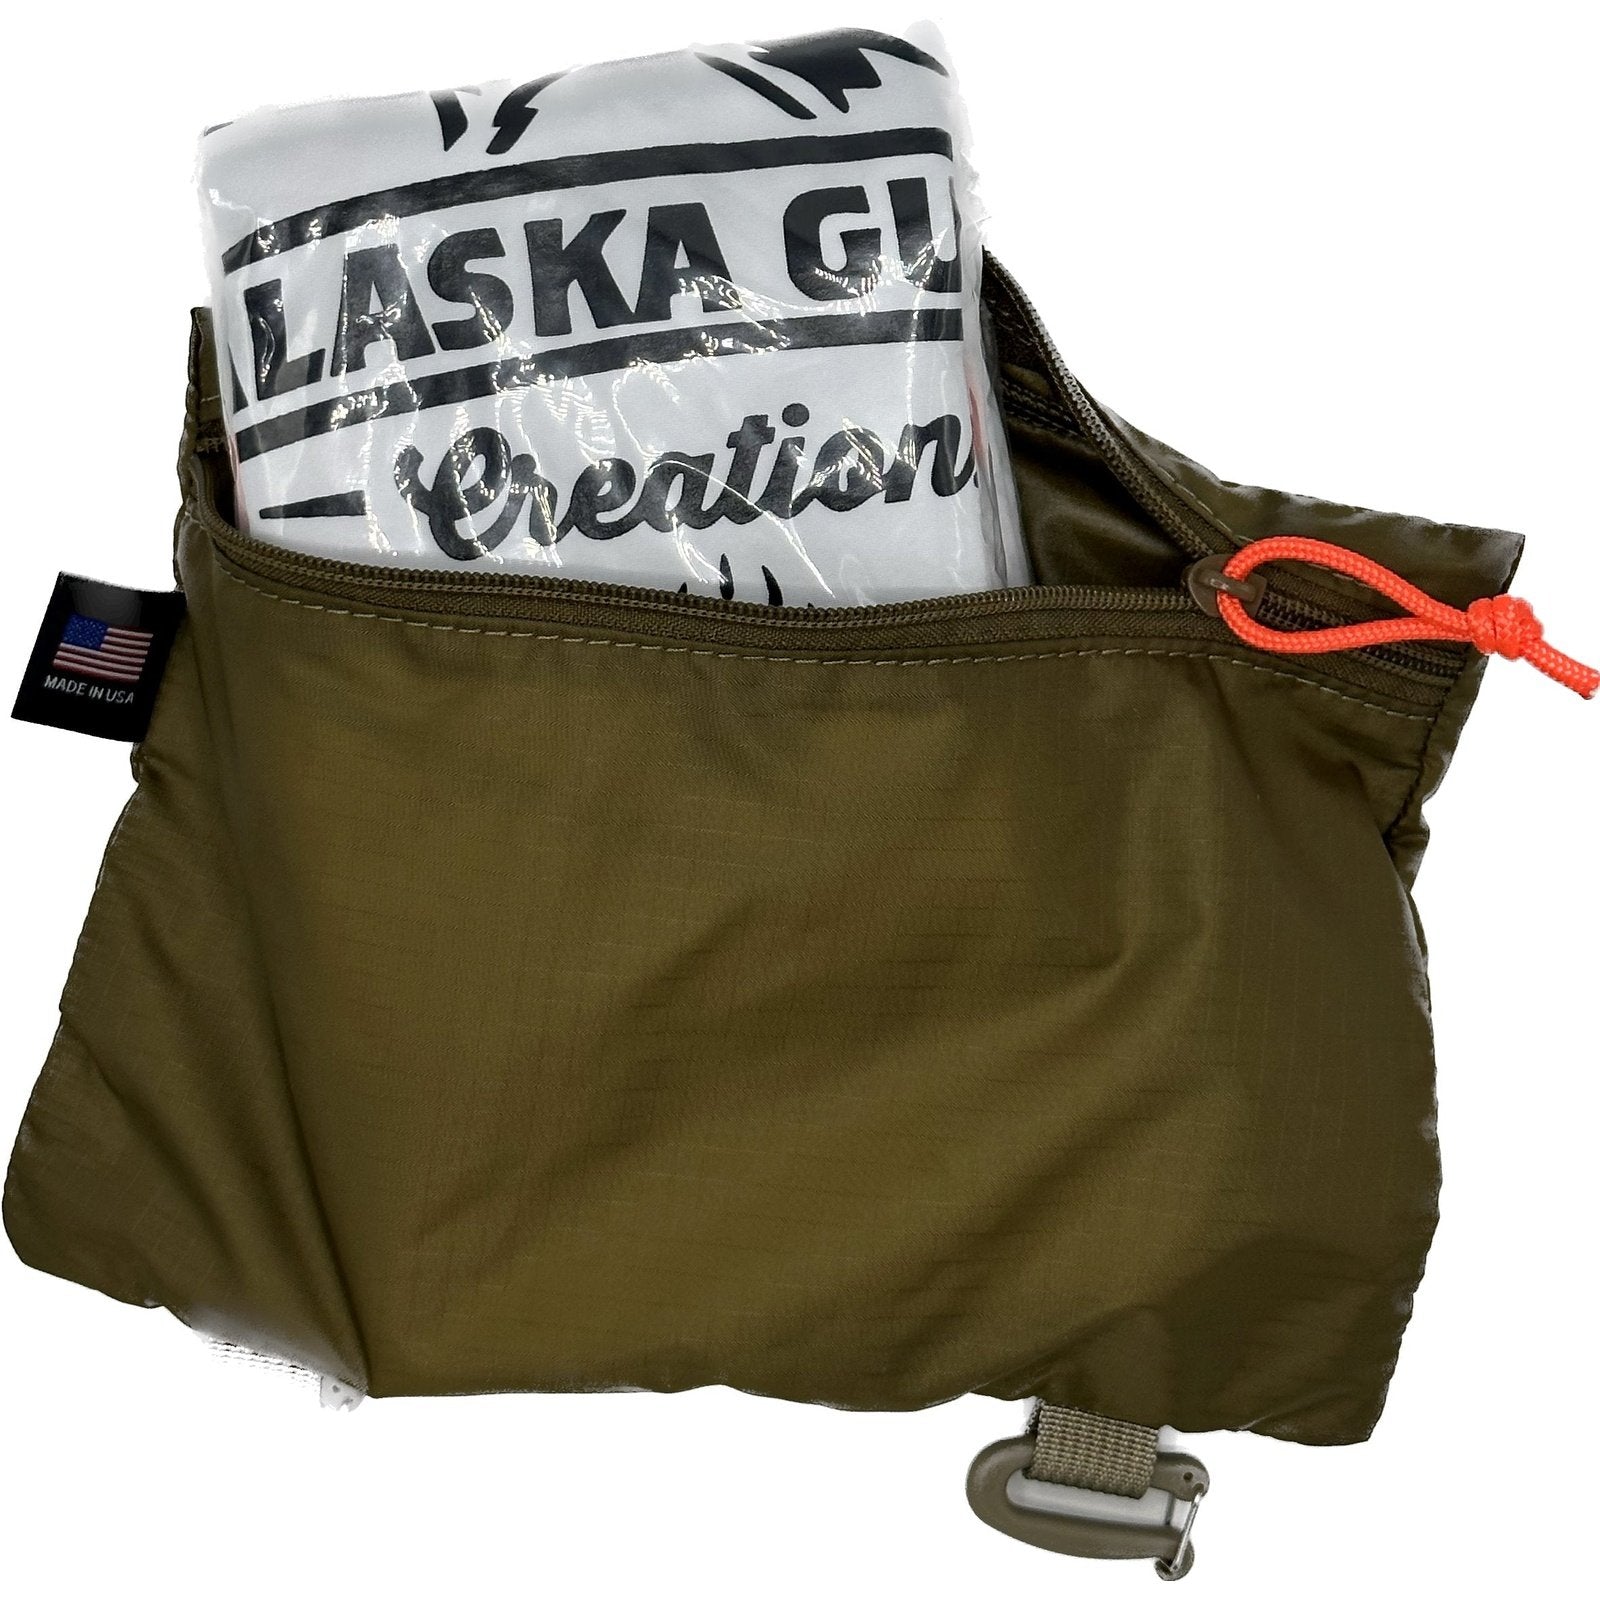 Stash Pull Out Alaska Guide Creations 